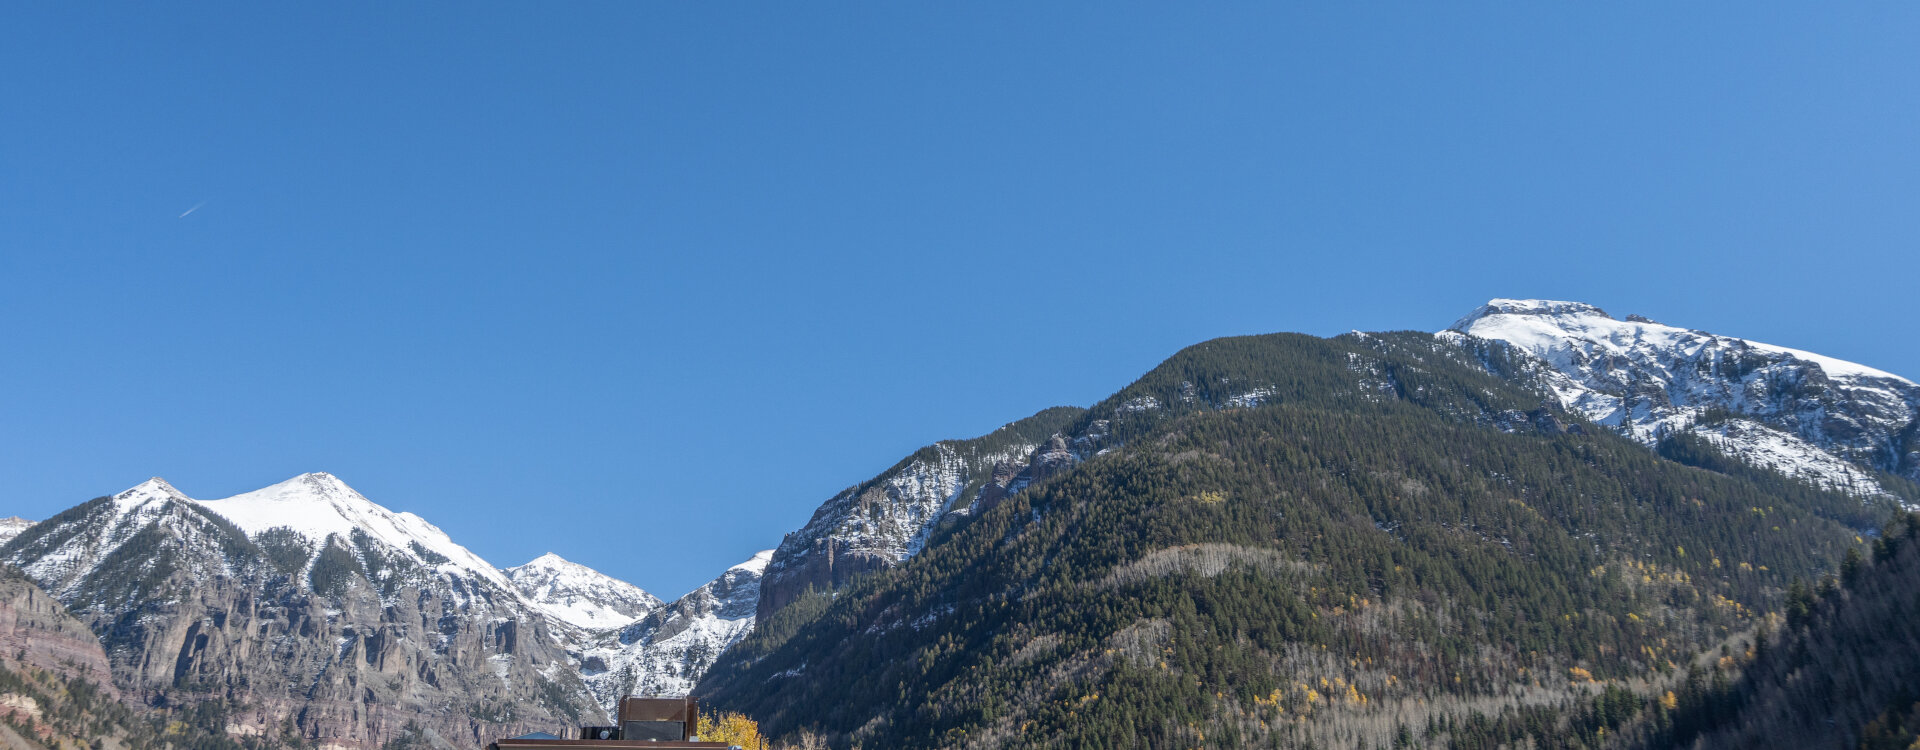 9.03.01-Telluride-Loft-at-Livery-Mountain-View